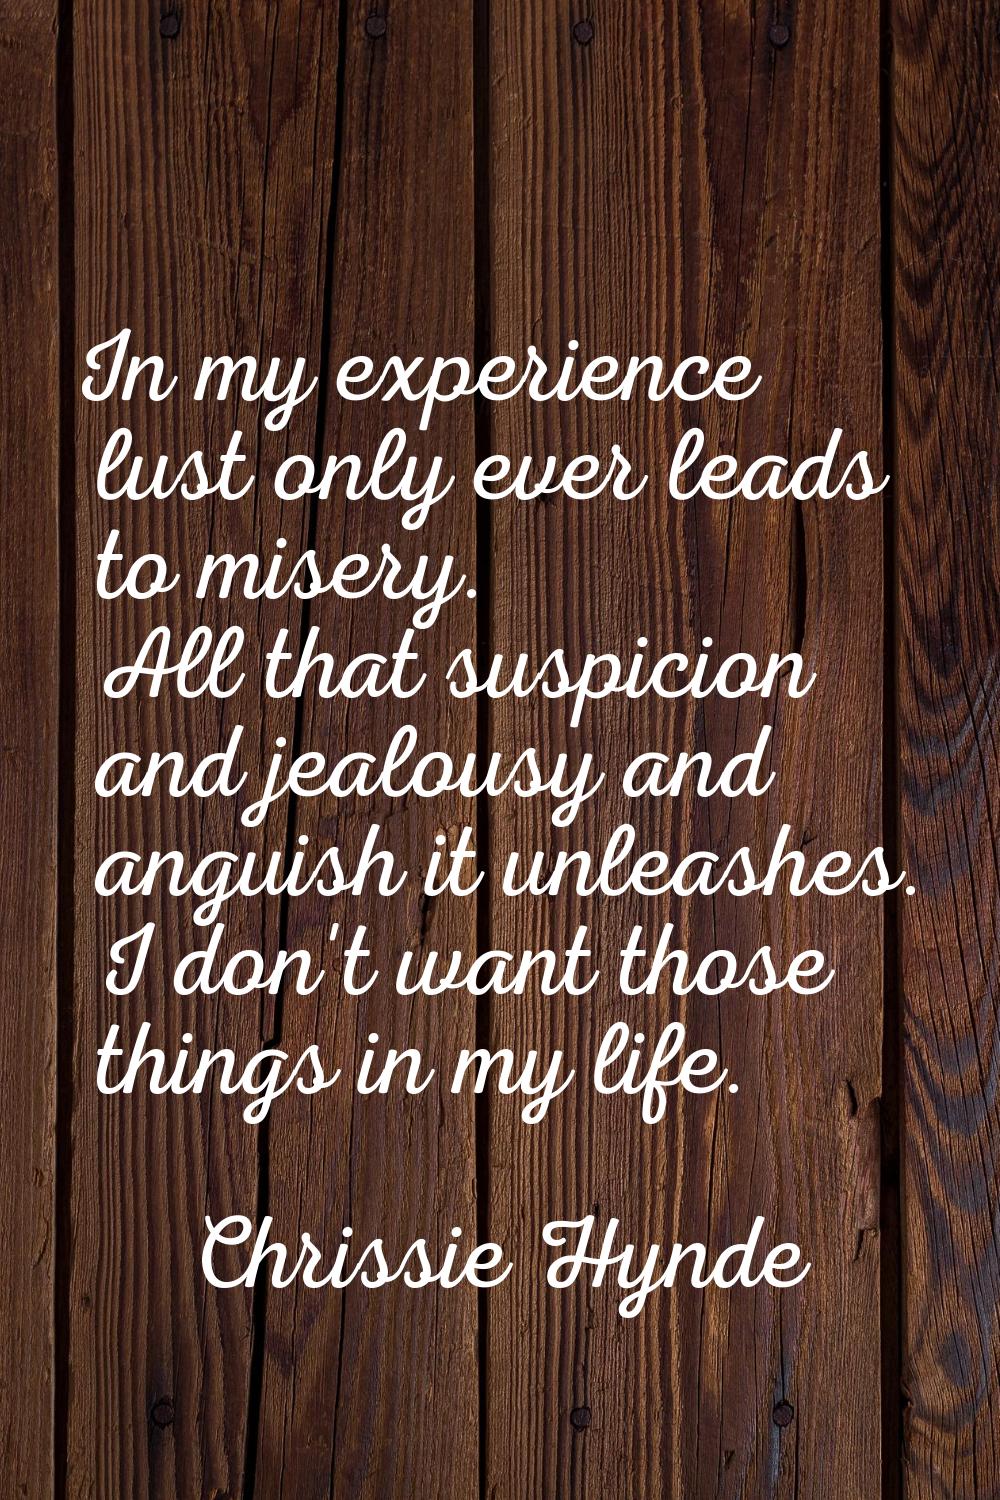 In my experience lust only ever leads to misery. All that suspicion and jealousy and anguish it unl